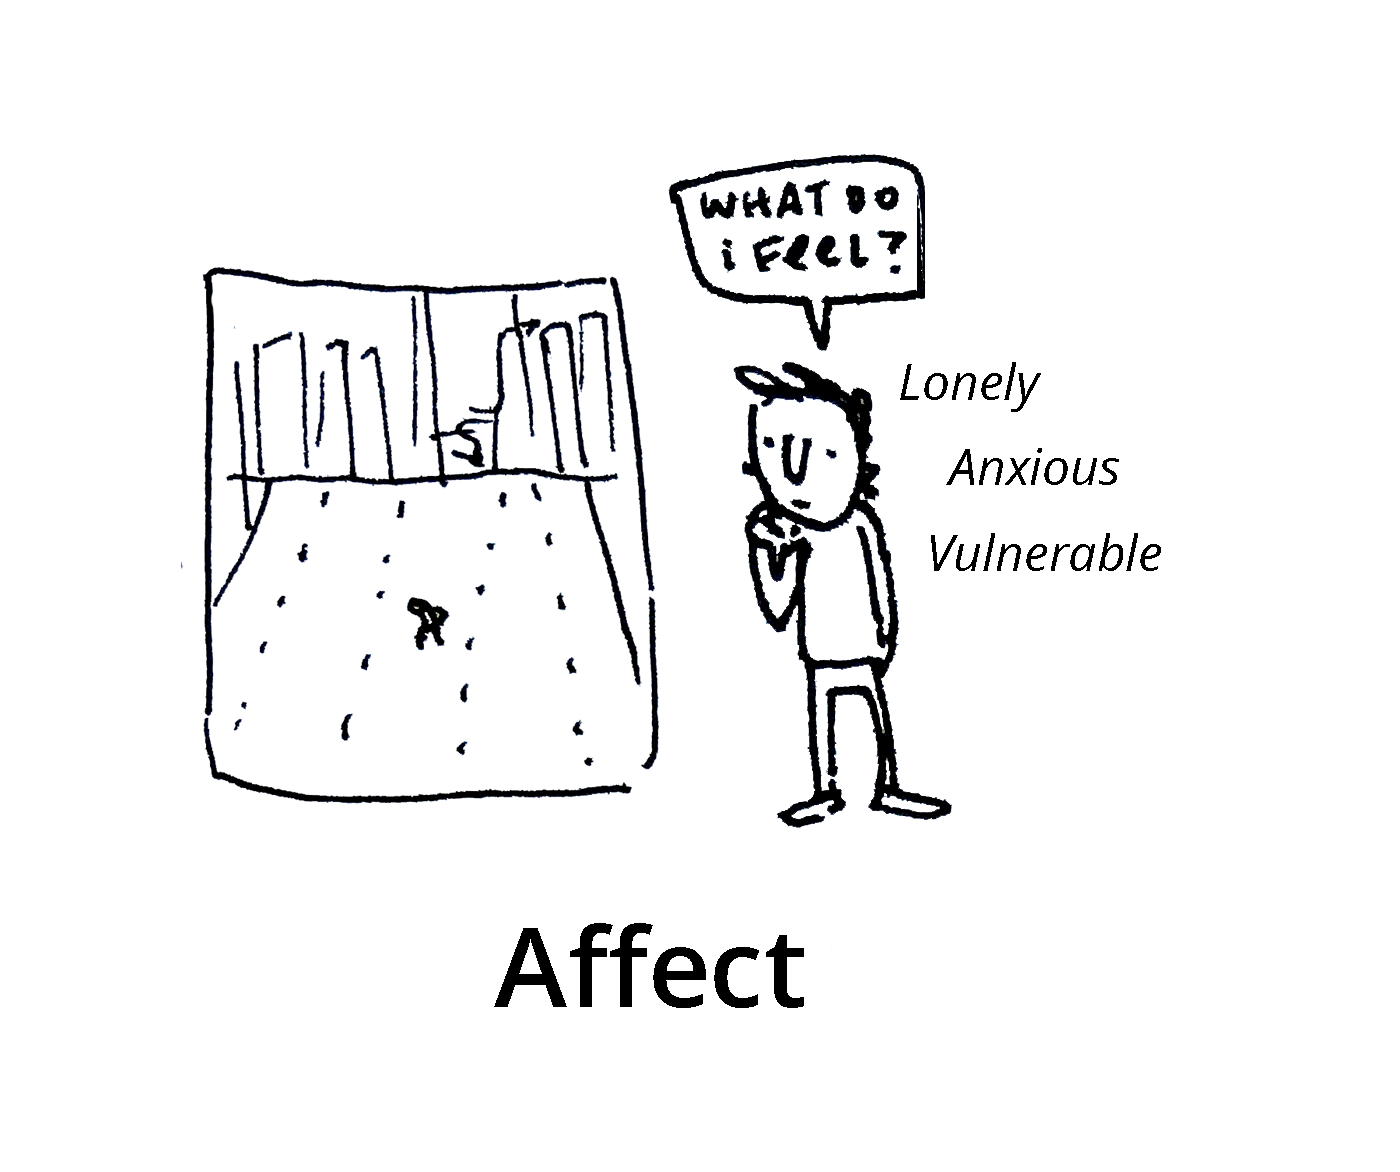 Affect: Using the narrative